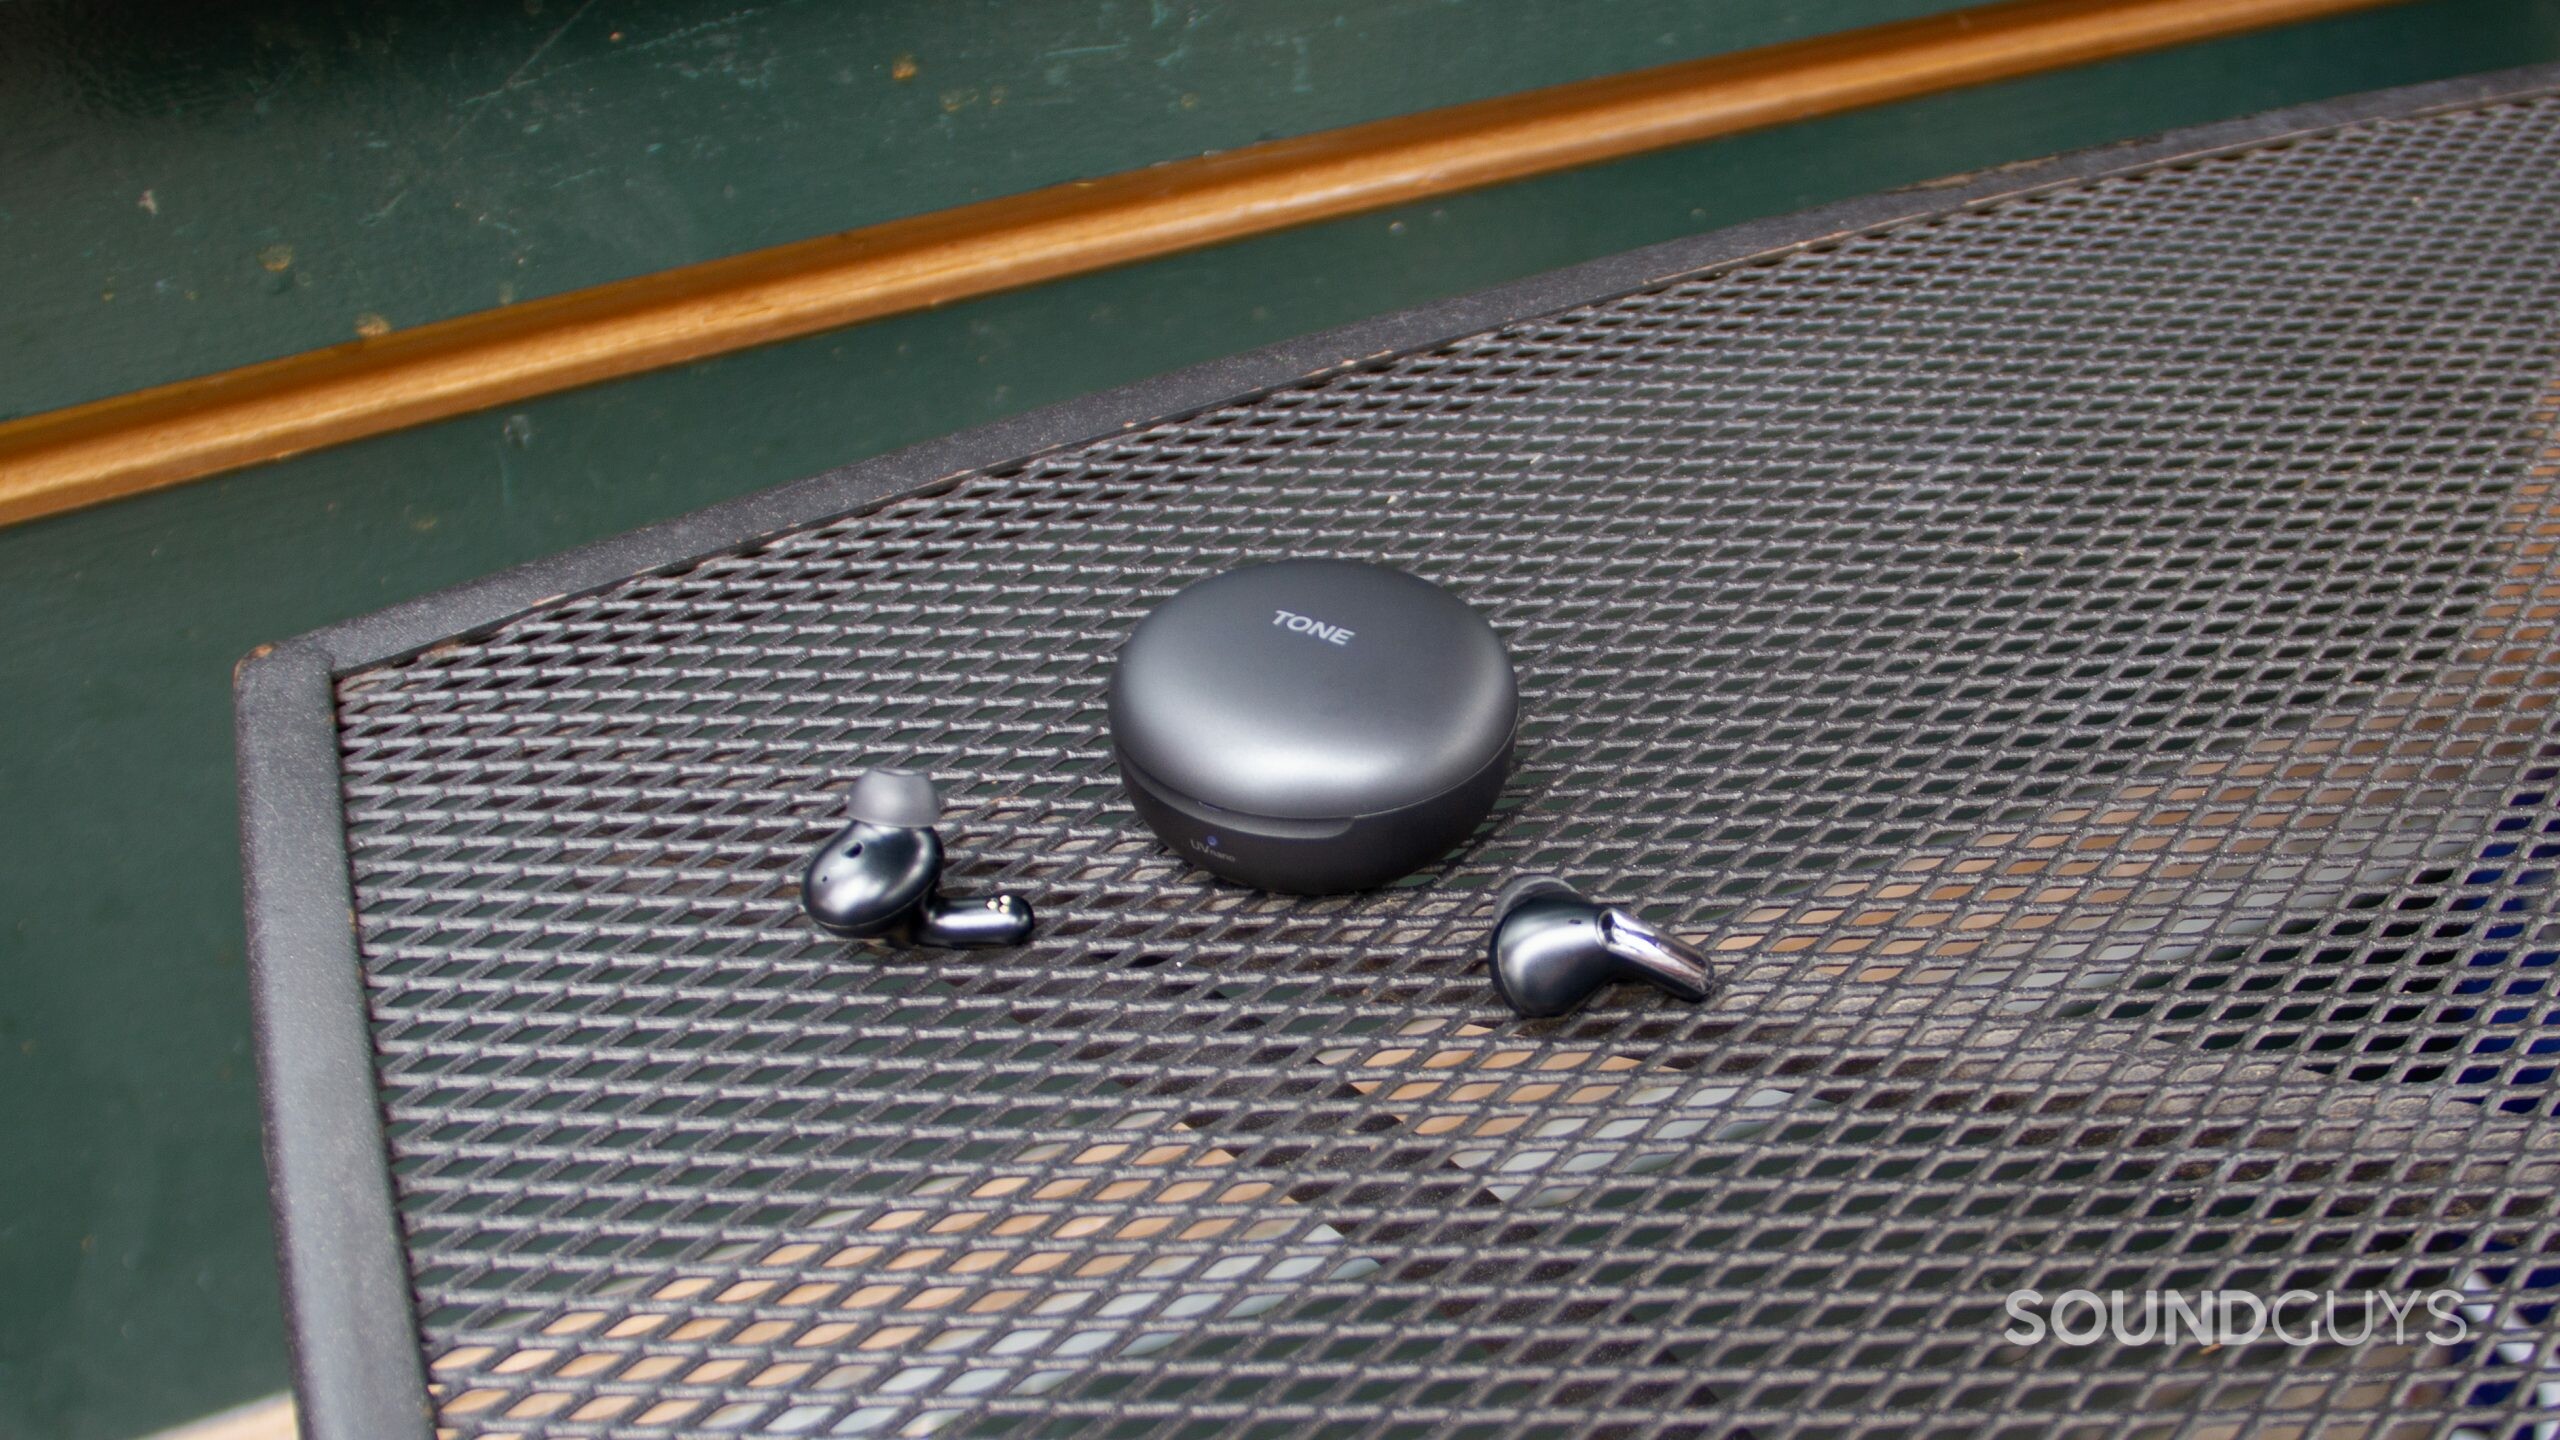 On a metal grate table the closed case and earbuds of the LG TONE Free FP8.